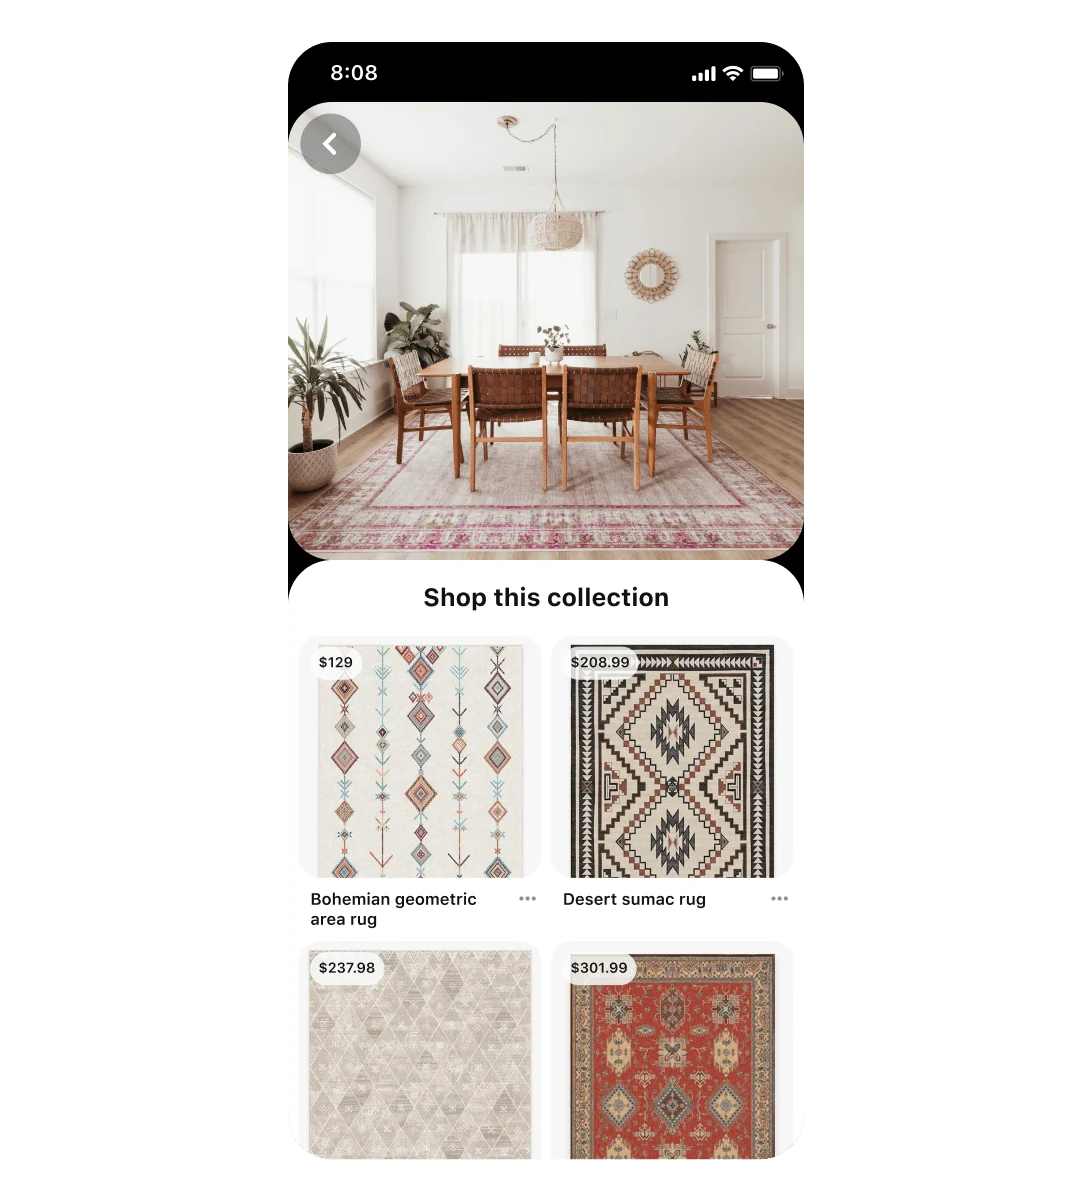 Mobile view of a collections ad for rugs. The ad creative is of a dining table with a large vintage-style area rug beneath it. Other images below show four rugs of a similar style but with varying designs and prices.